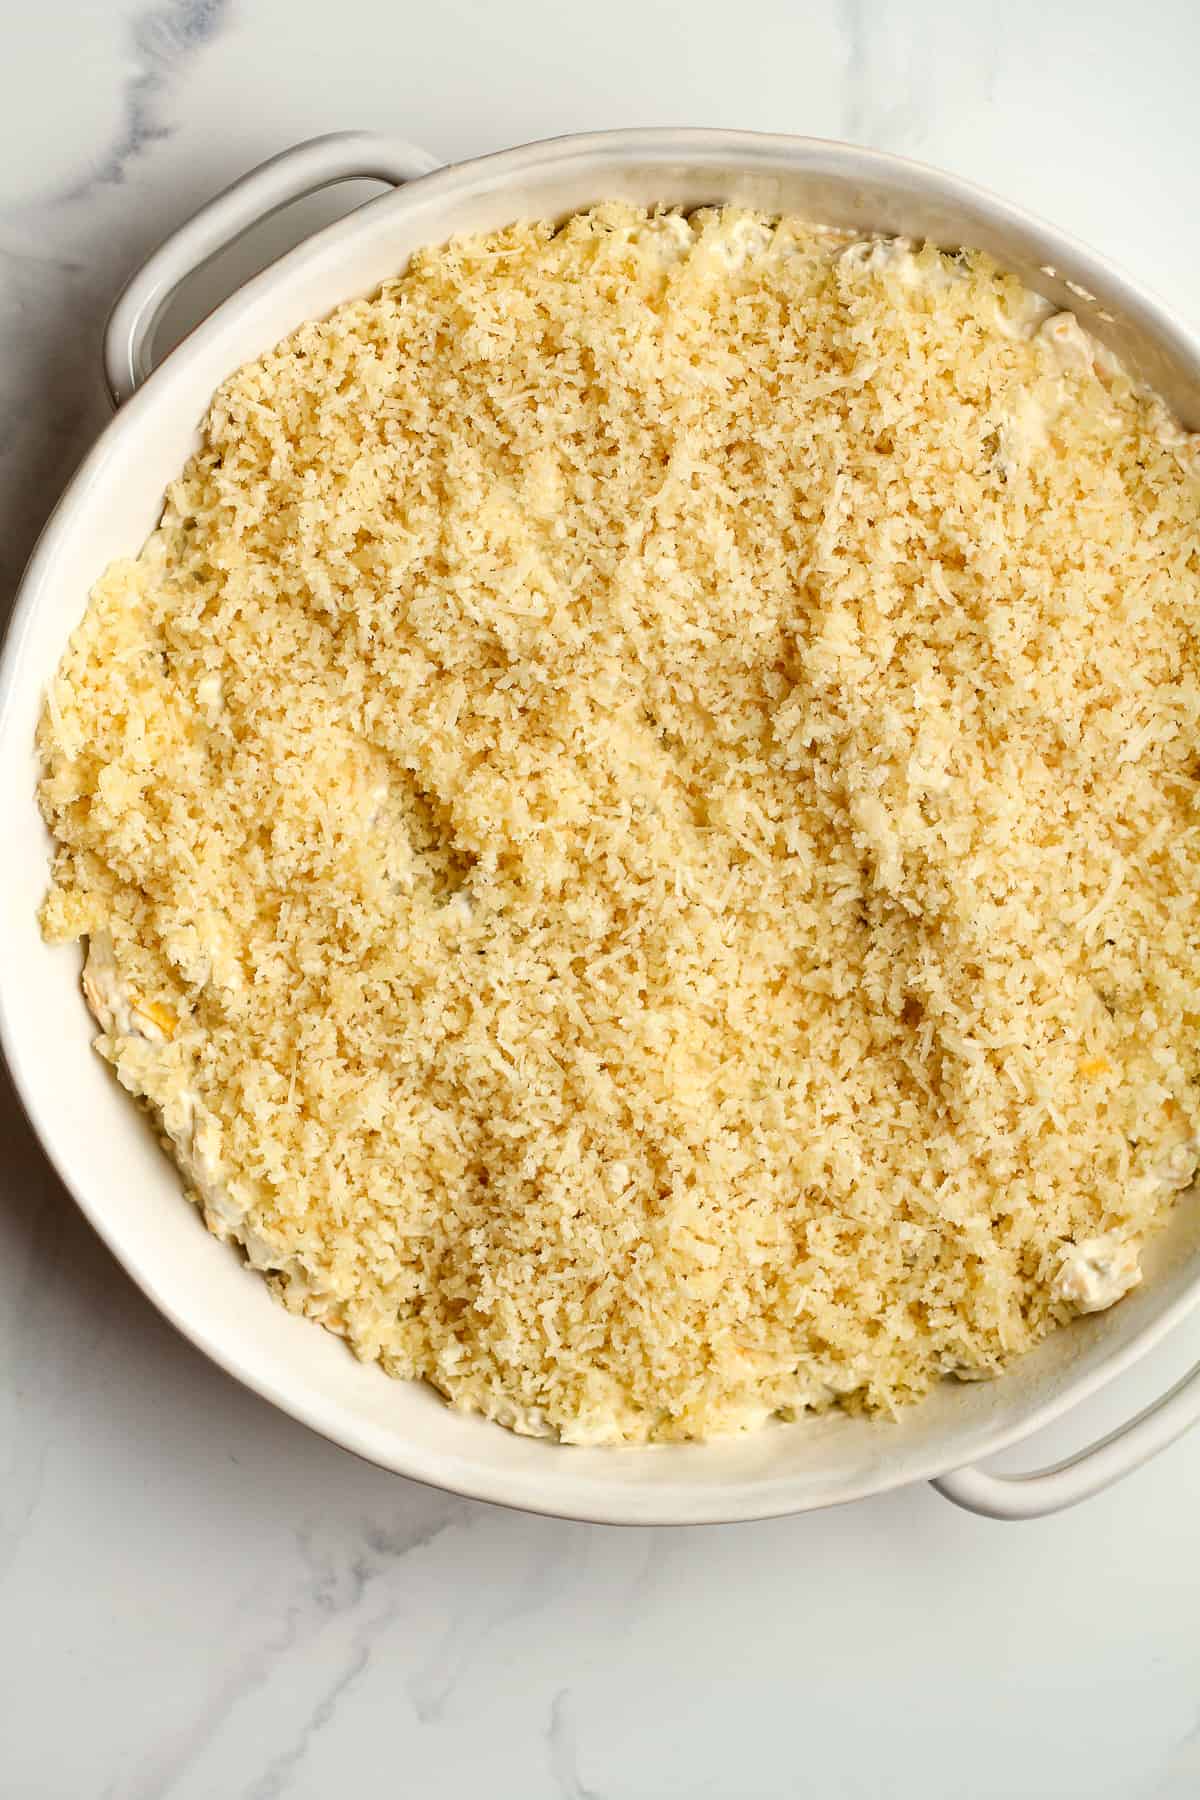 The dip with breadcrumb topping.